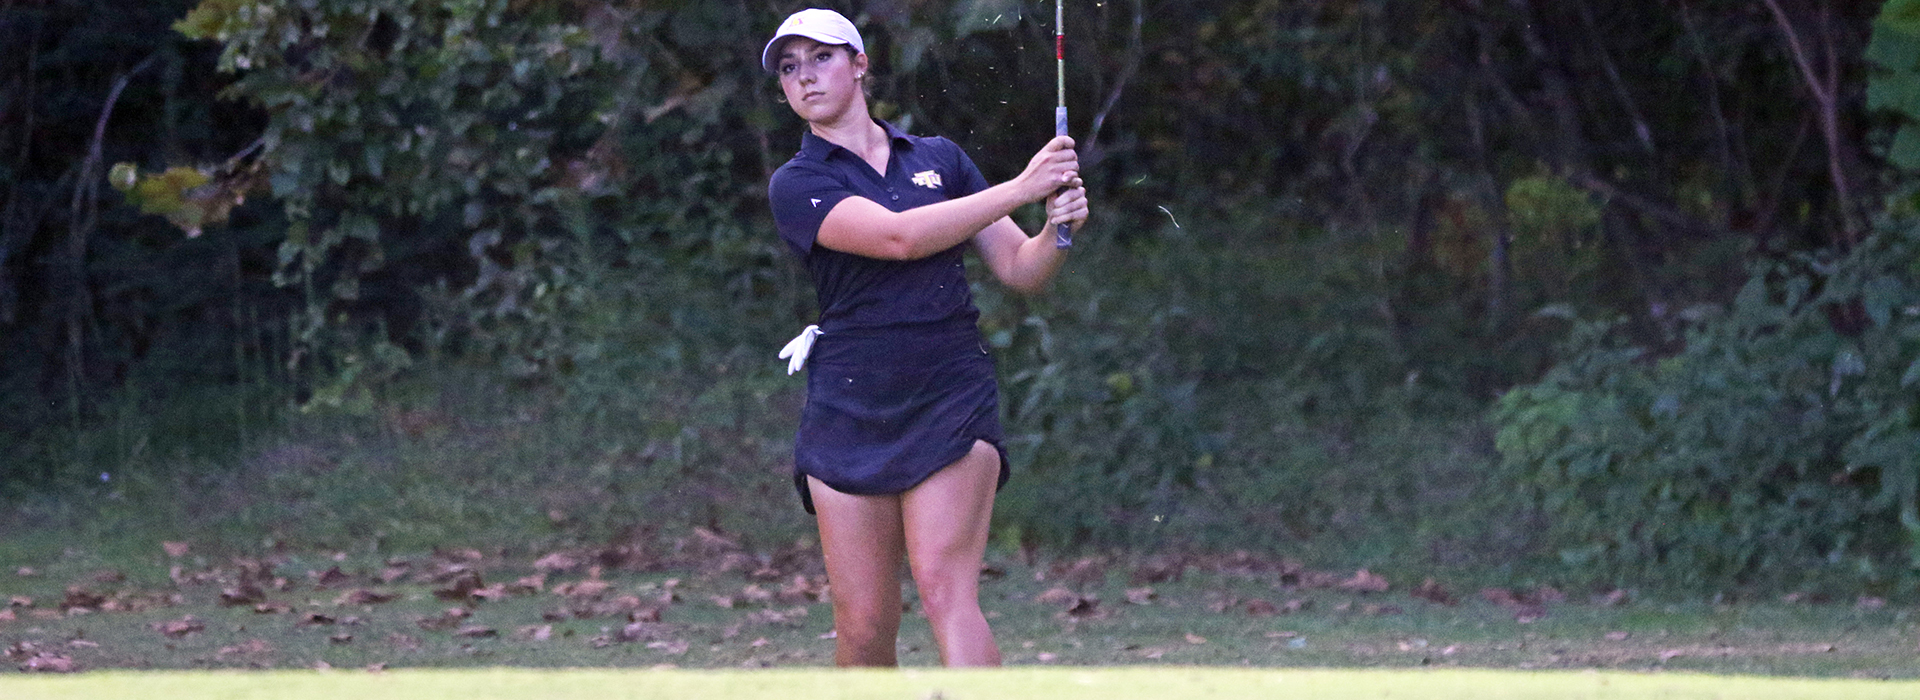 Tech edged by Western Carolina, 3-2, on day one of Oyster Shuck Match Play event